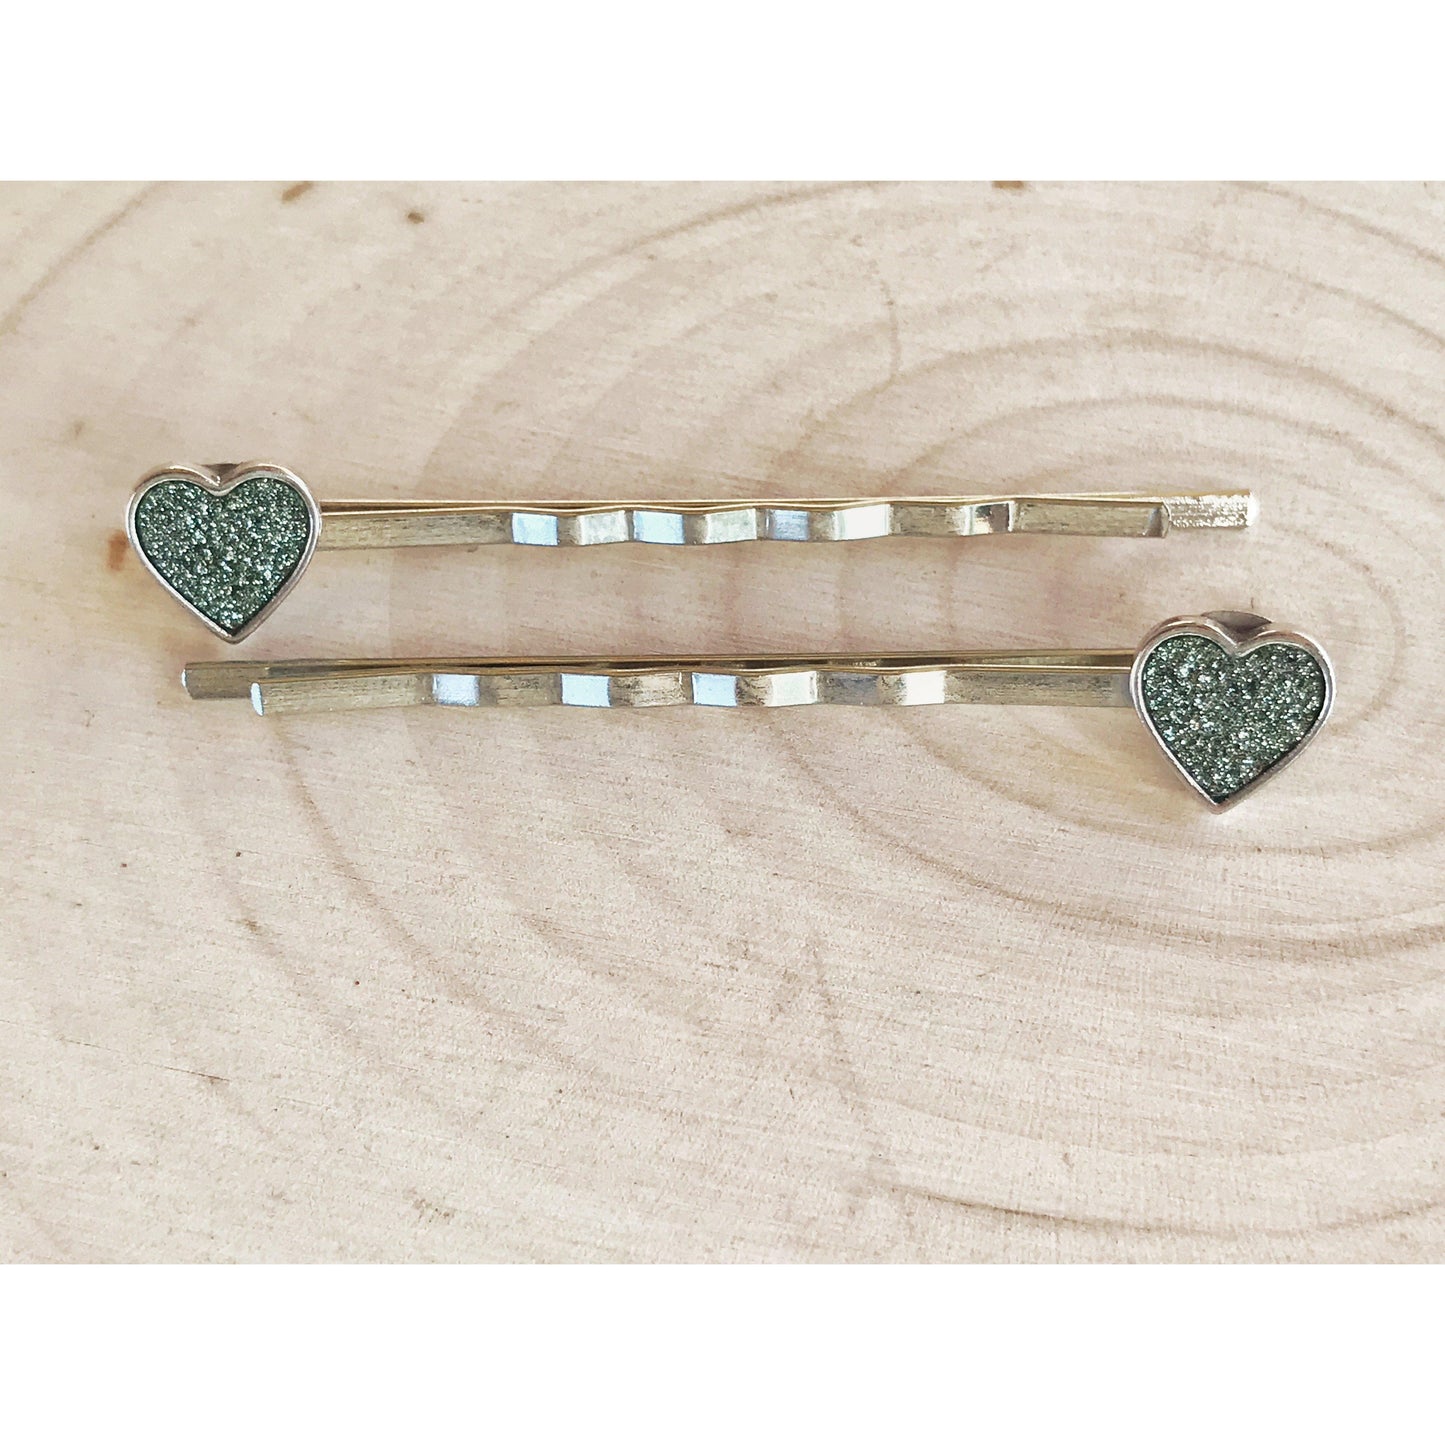 Tiny Green Glitter Heart Hair Pins - Delicate and Sparkling Accessories